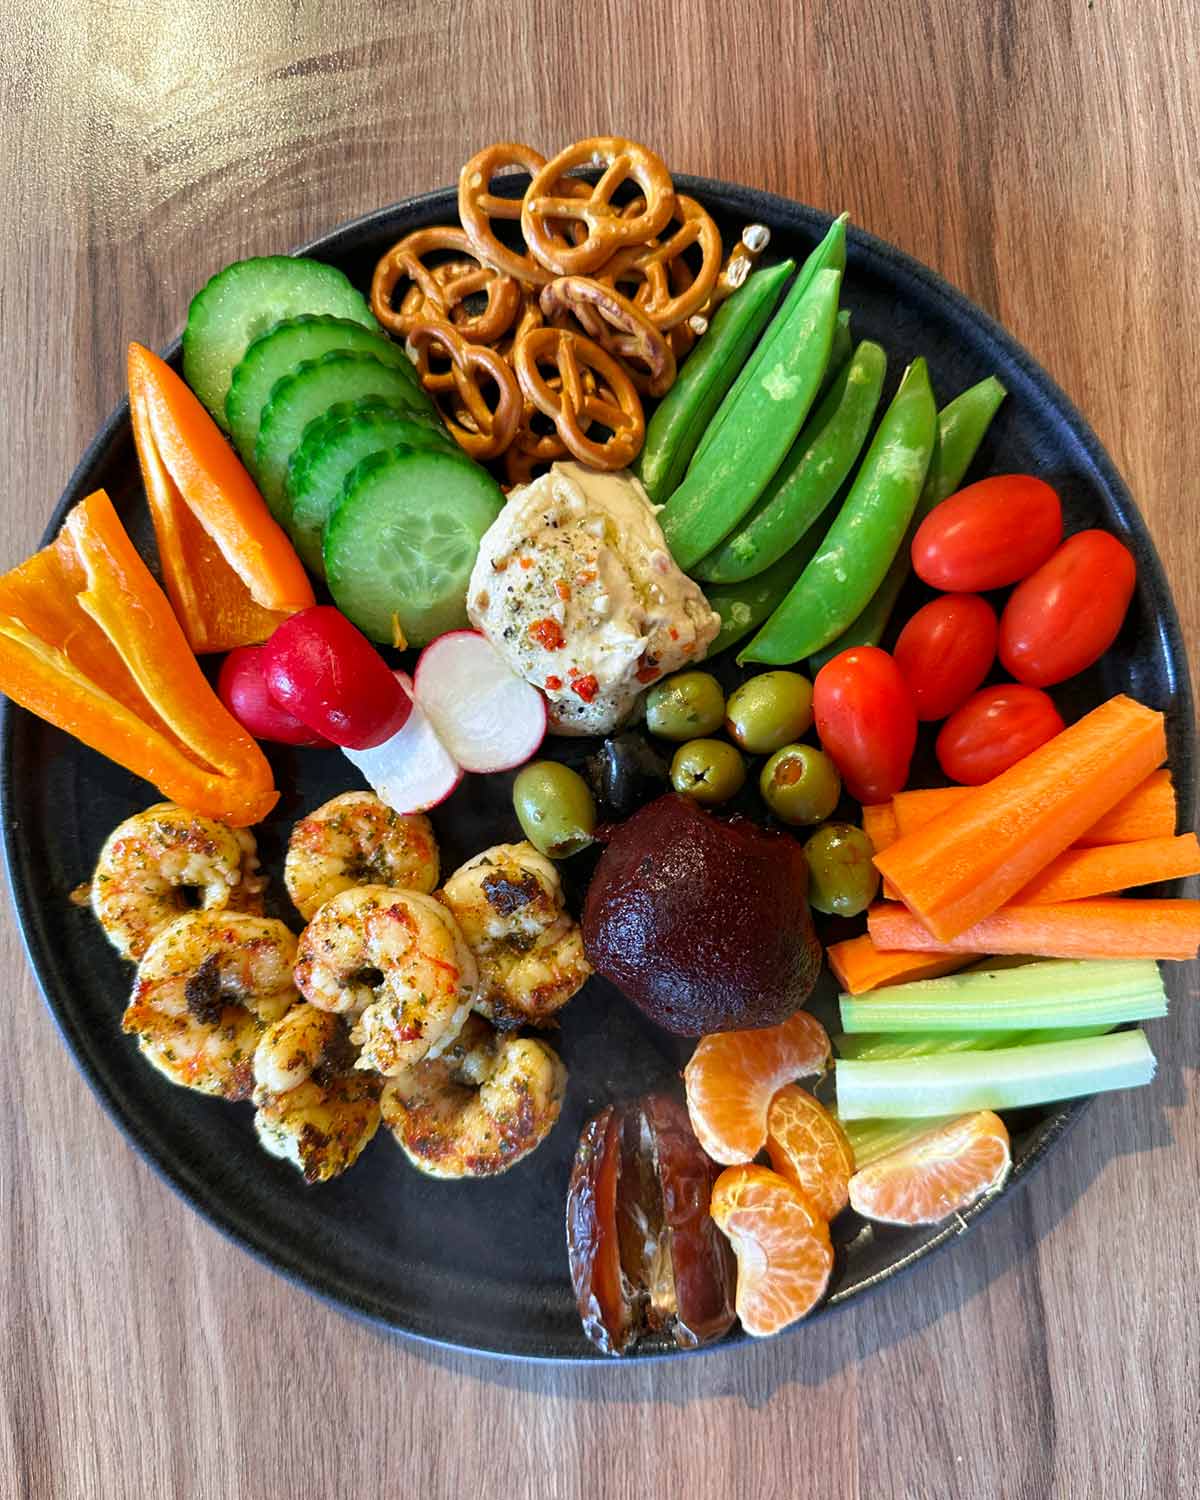 A plate of cooked prawns, carrot, cucumber, peas, tomatoes, peppers, pretzels, humus and fruit.